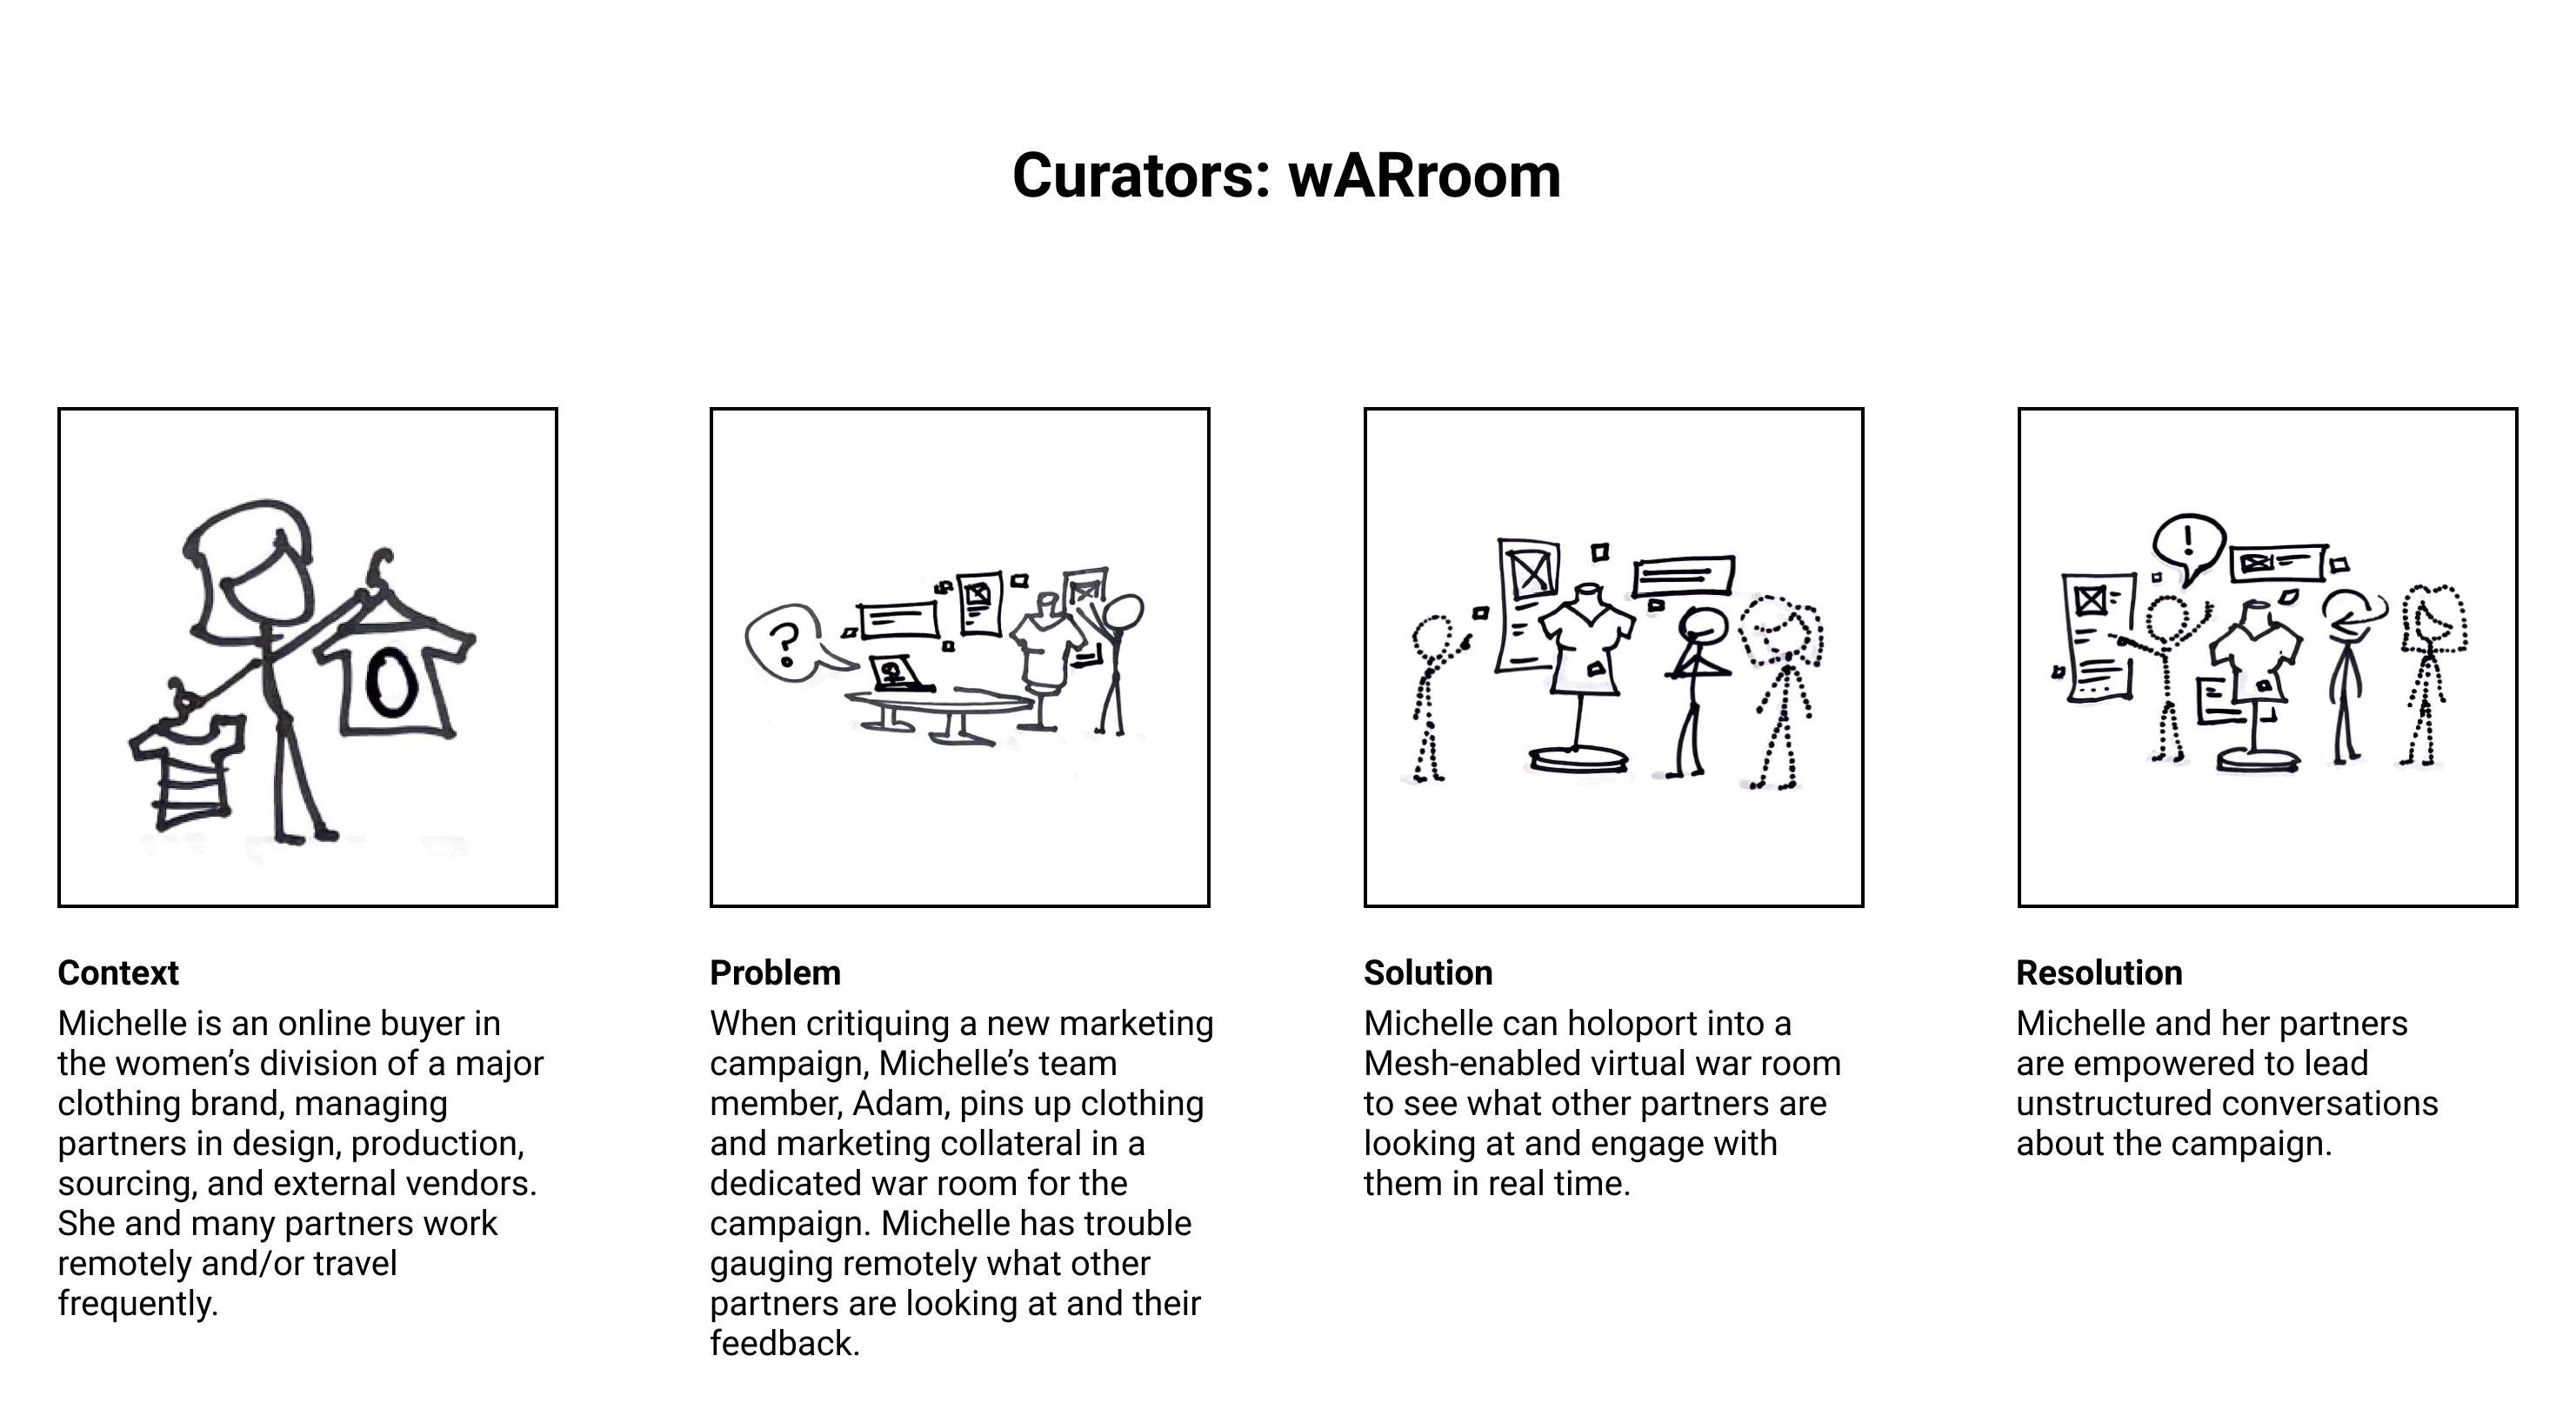 Curators can use a war room to sync work immersively with colleagues